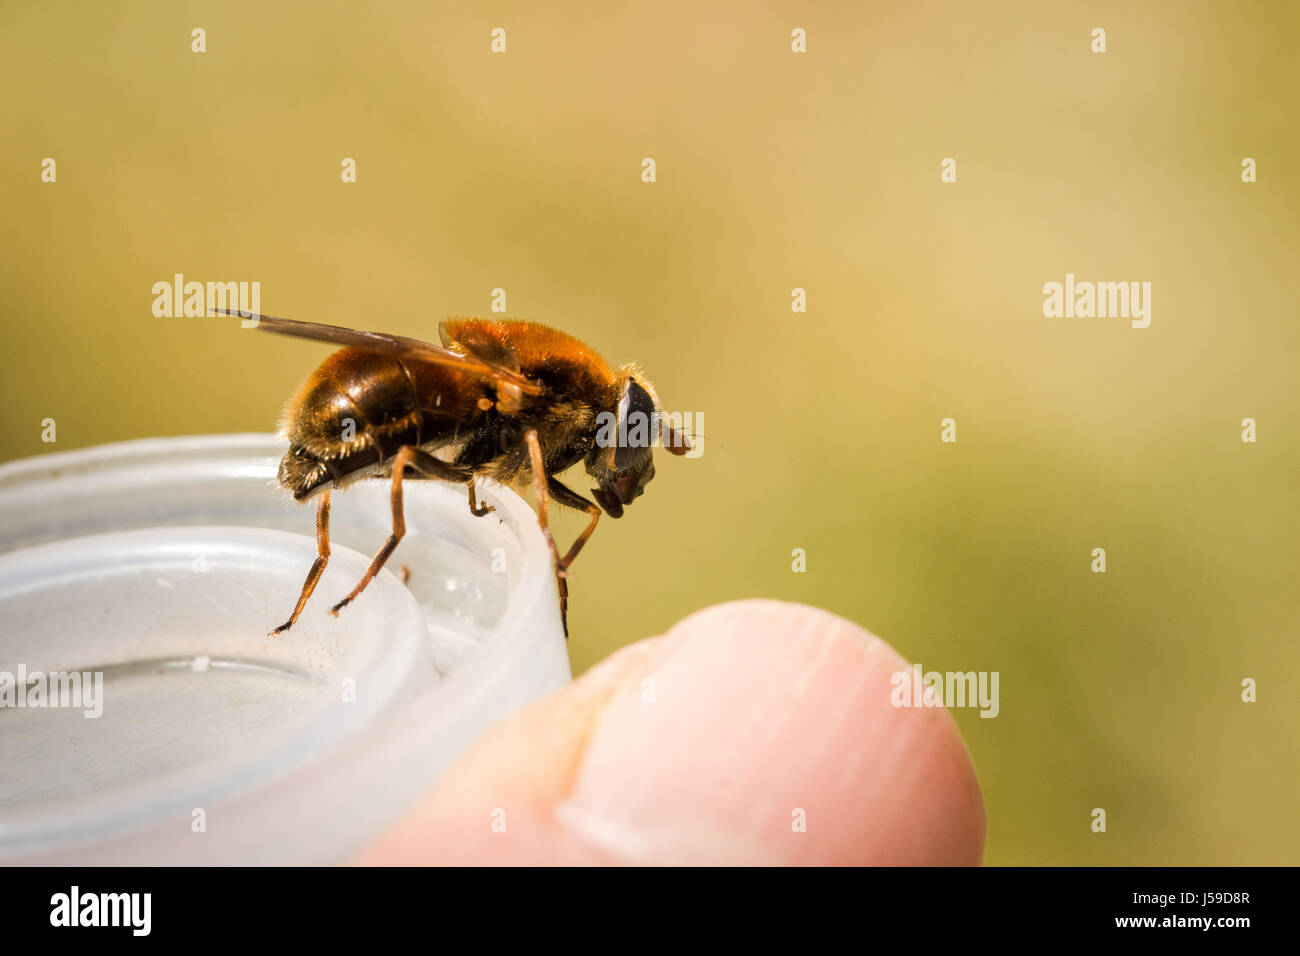 Hoverfly, Cheilosia chrysocoma, female, sitting on a plastic cover Stock Photo